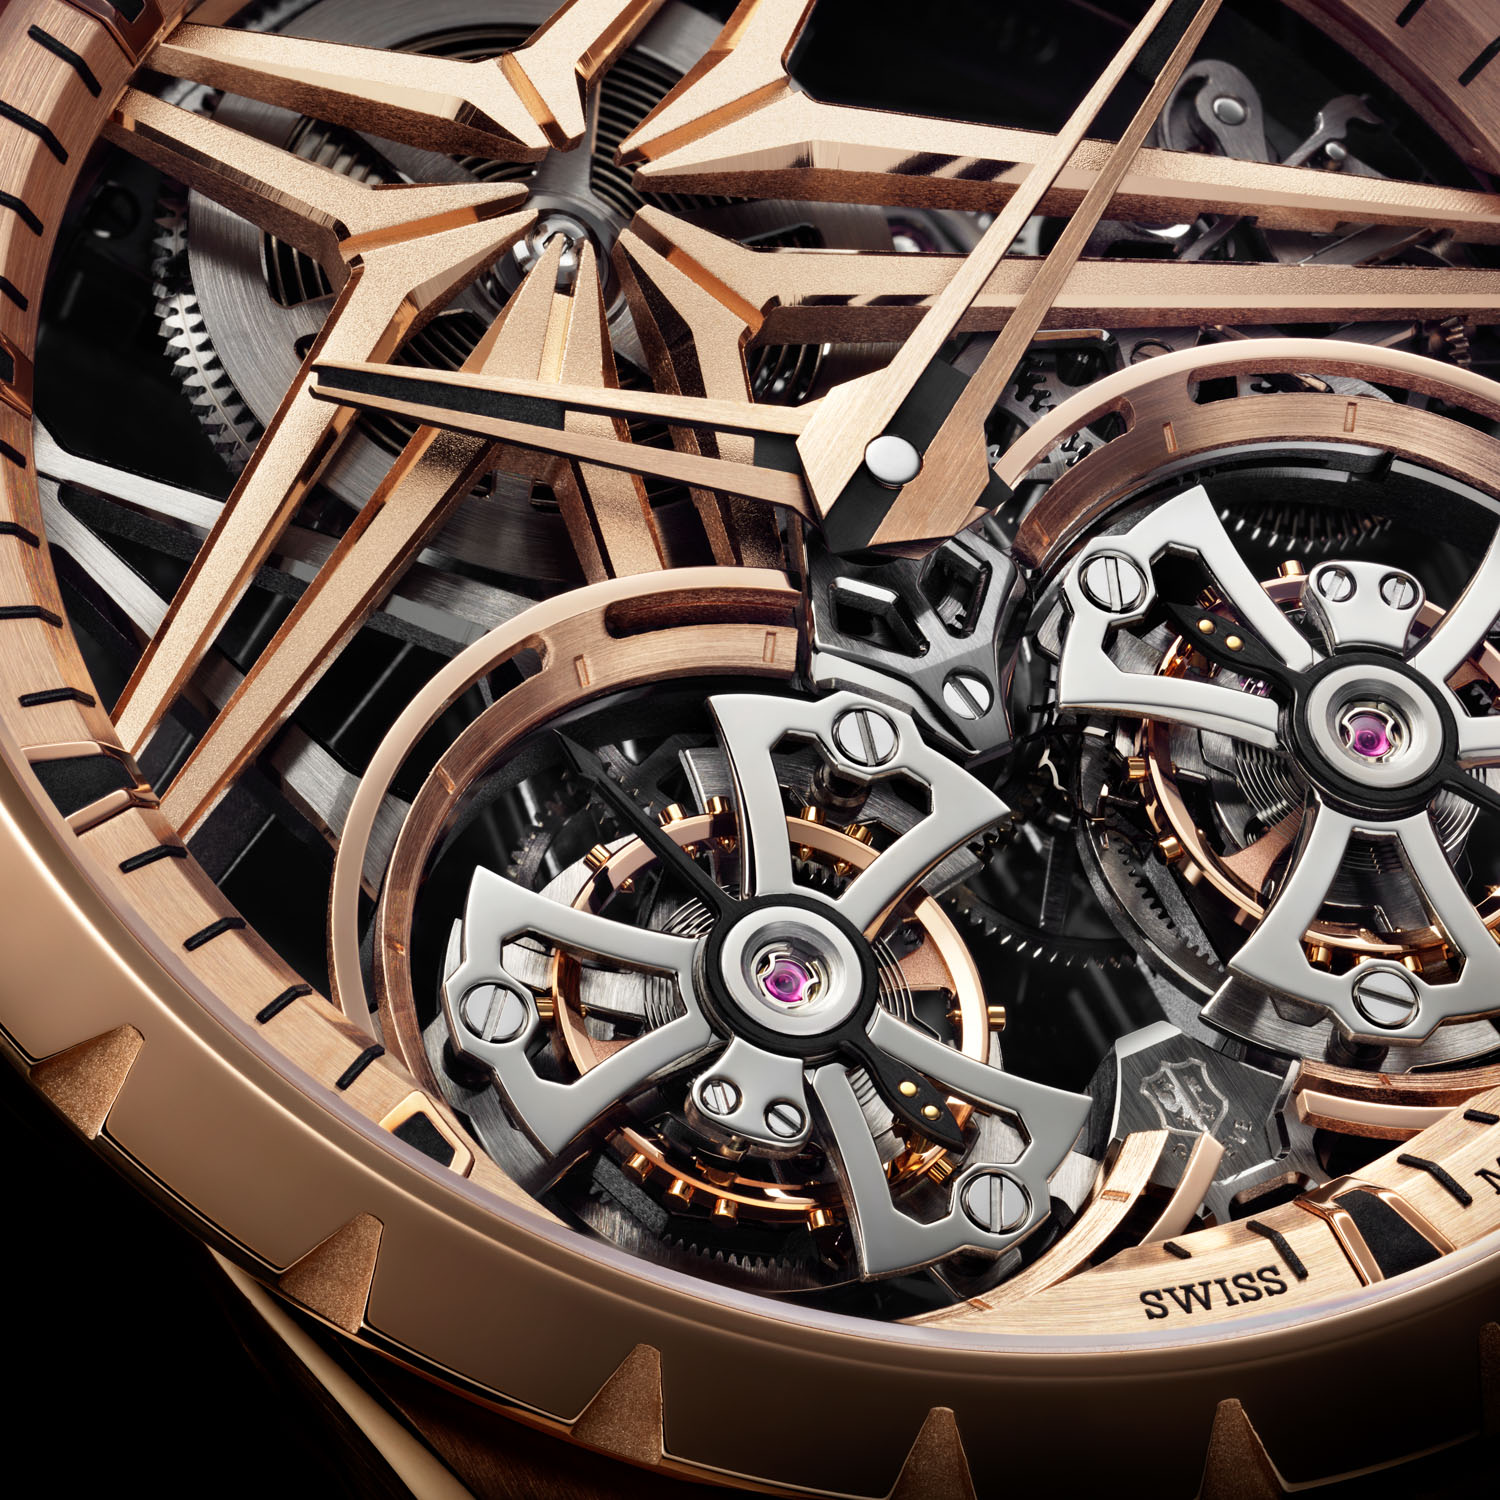 The end result of using titanium and cobalt to form the parts of the cage of the two tourbillons leads to lighter regulating organs and also heightened anti-magnetic properties